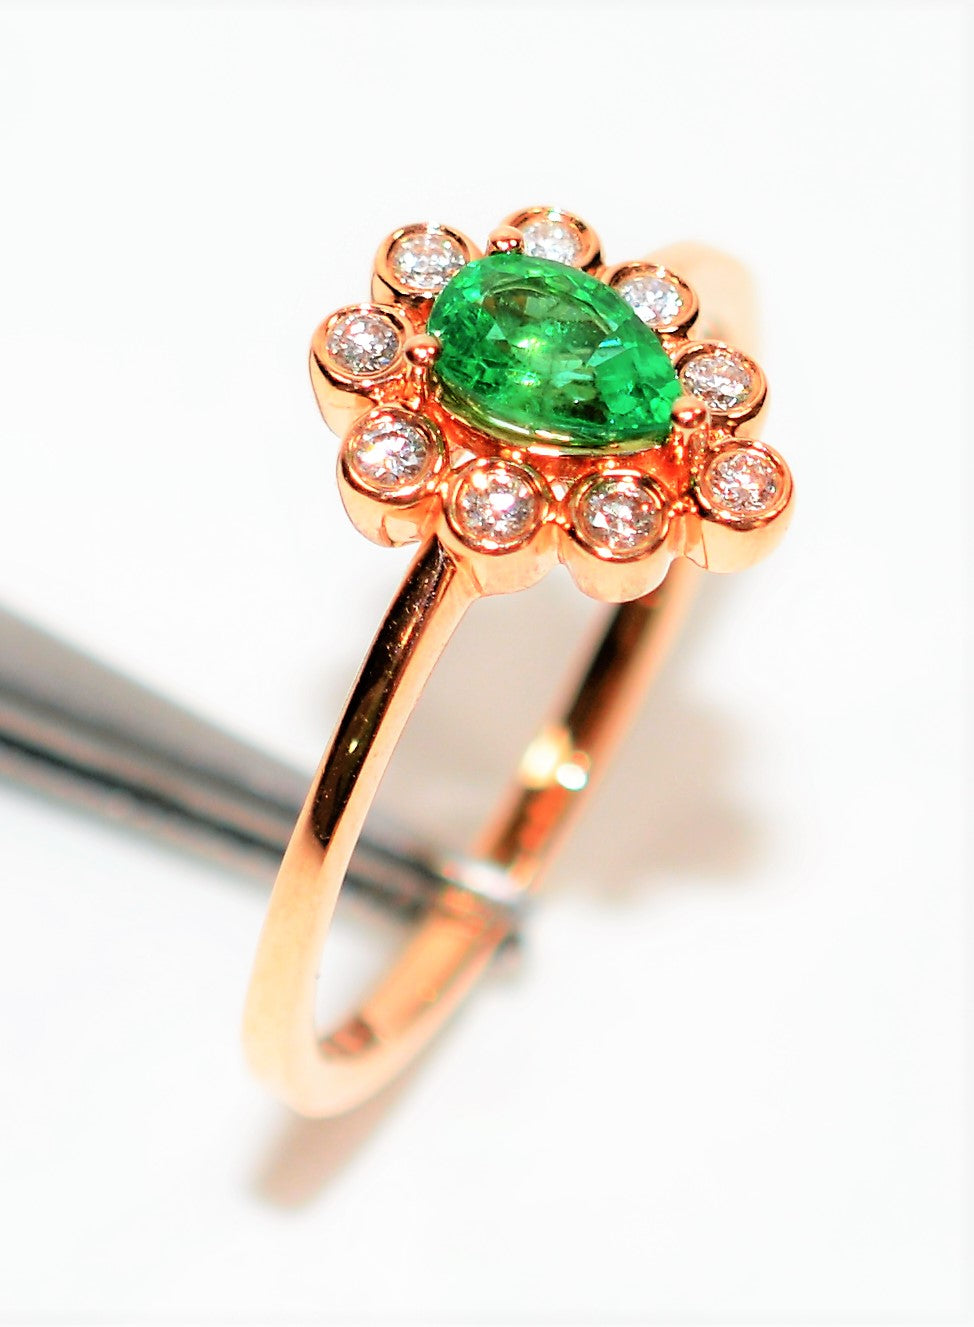 LeVian Natural Colombian Emerald & Diamond Ring 14K Rose Gold .44tcw Engagement Ring Statement Ring LeVian Bridal Jewelry Gemstone Ring Fine